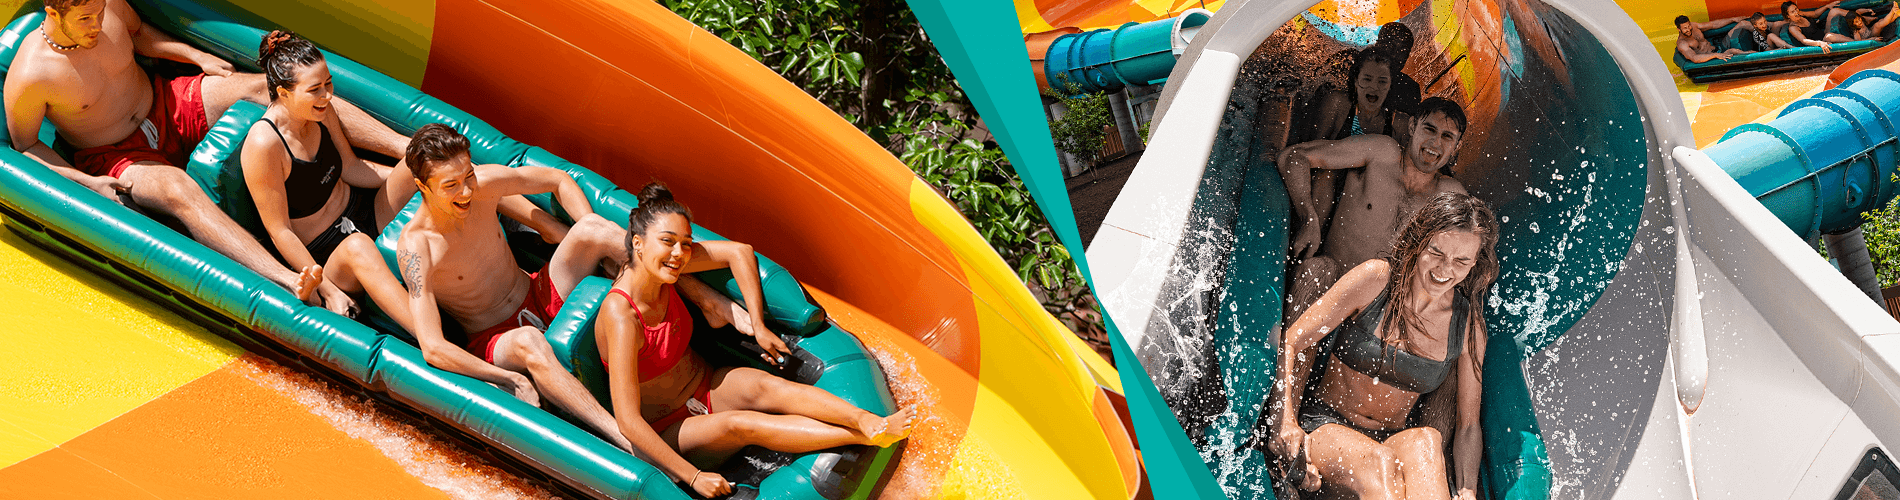 Virginia's first water coaster, Cutback Watercoaster, new for 2019 at Water Country USA